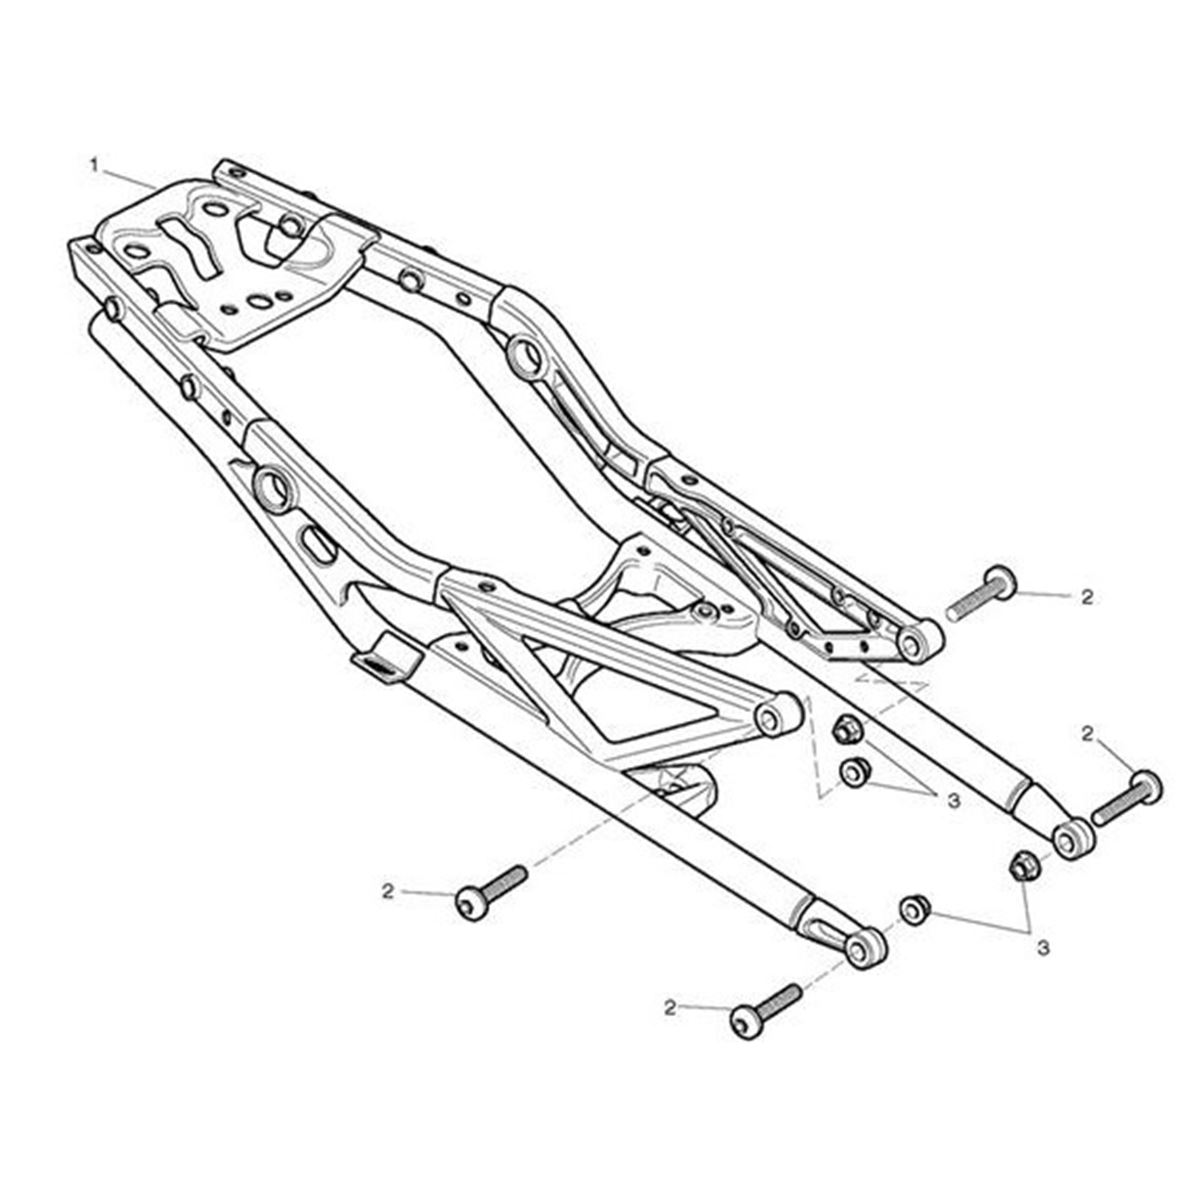 Picture of Rear Subframe Assy, Graphite